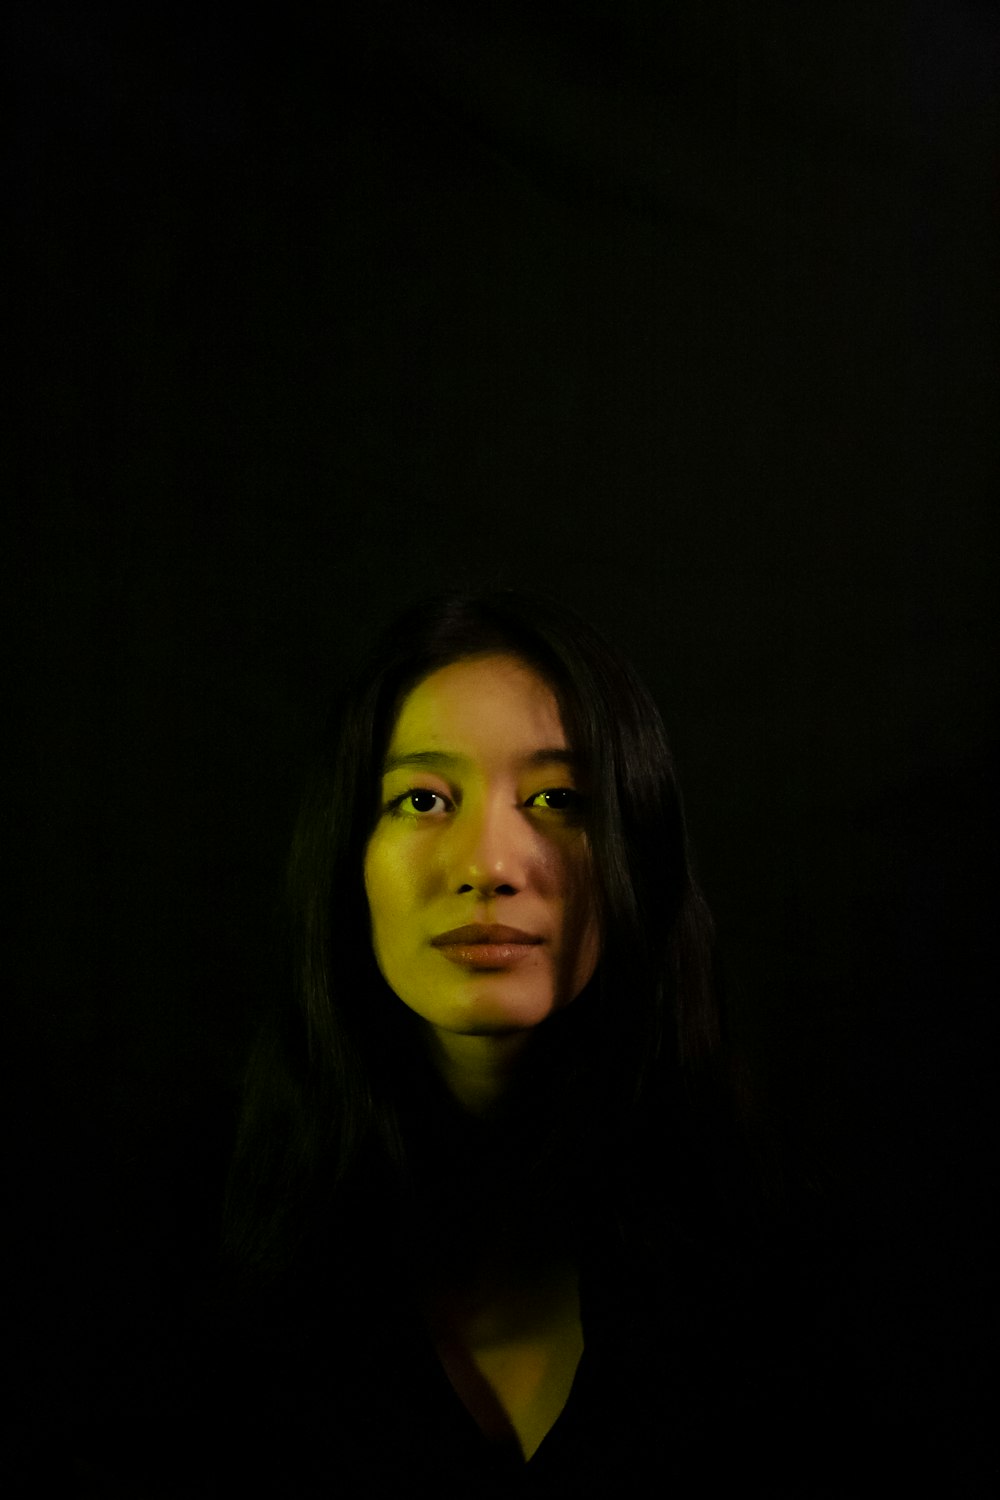 a woman in a dark room with a black background